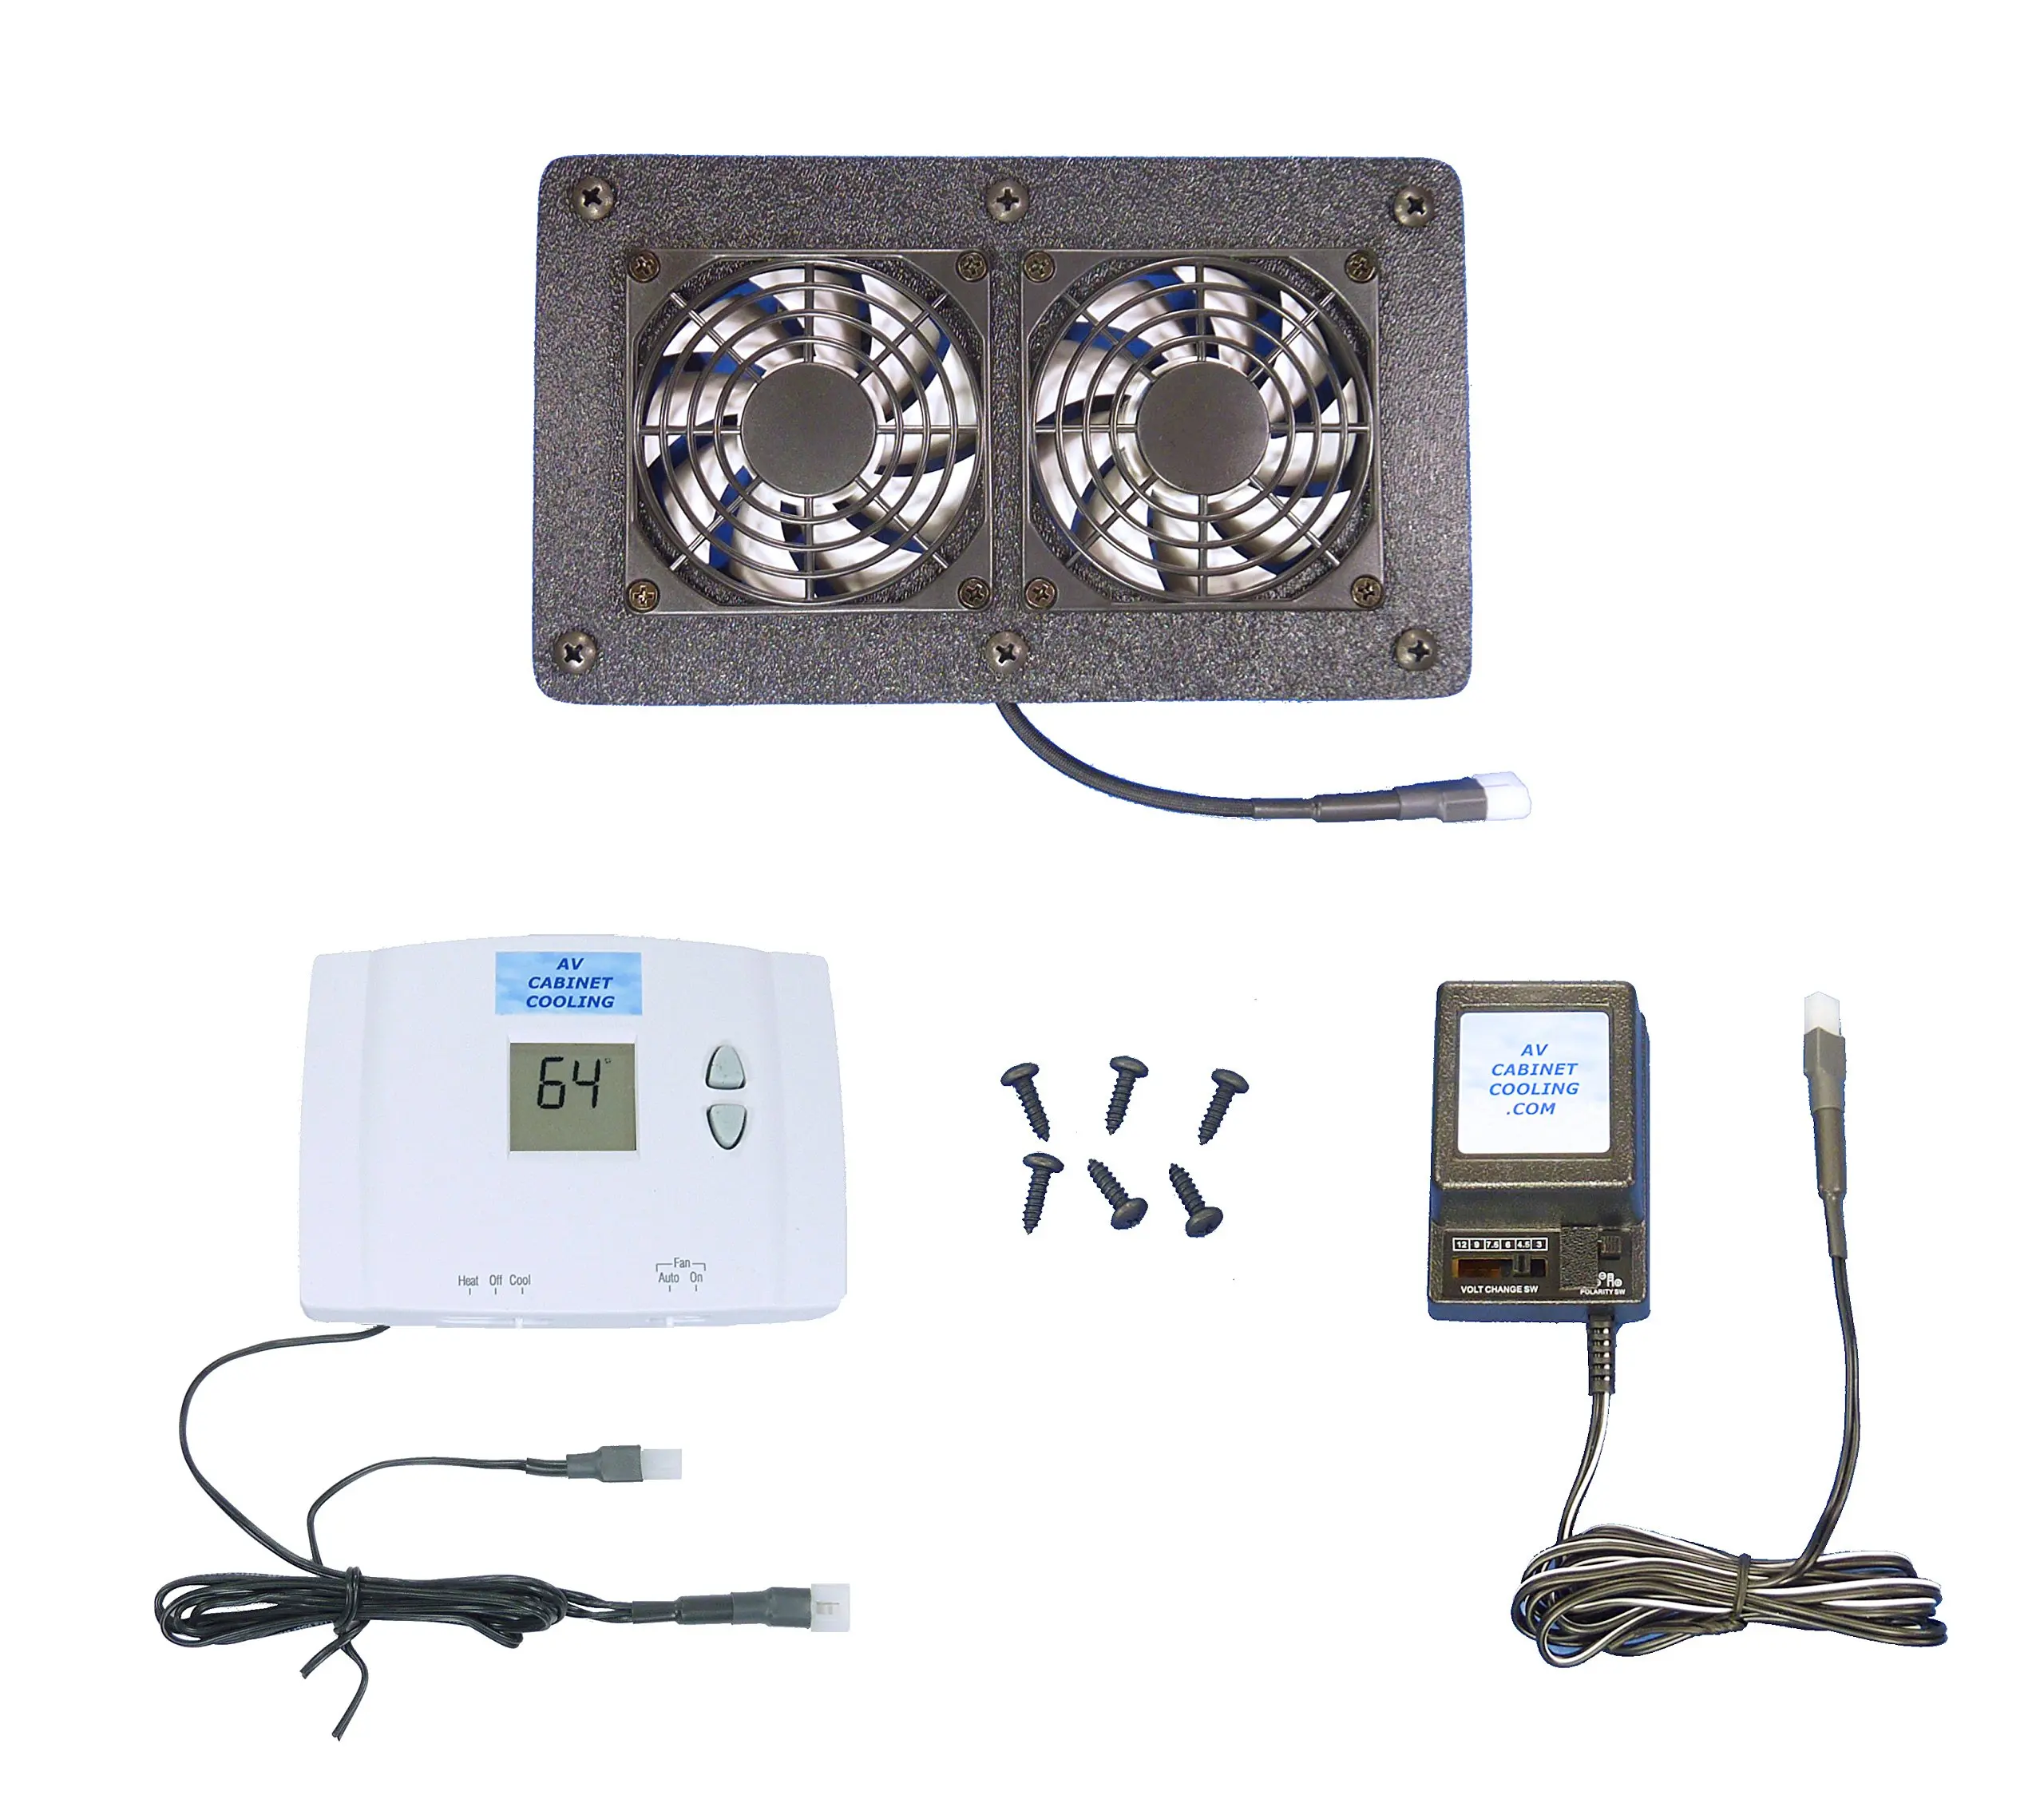 Buy AV Cabinet Home Theater Cooling fans with Digital thermostat